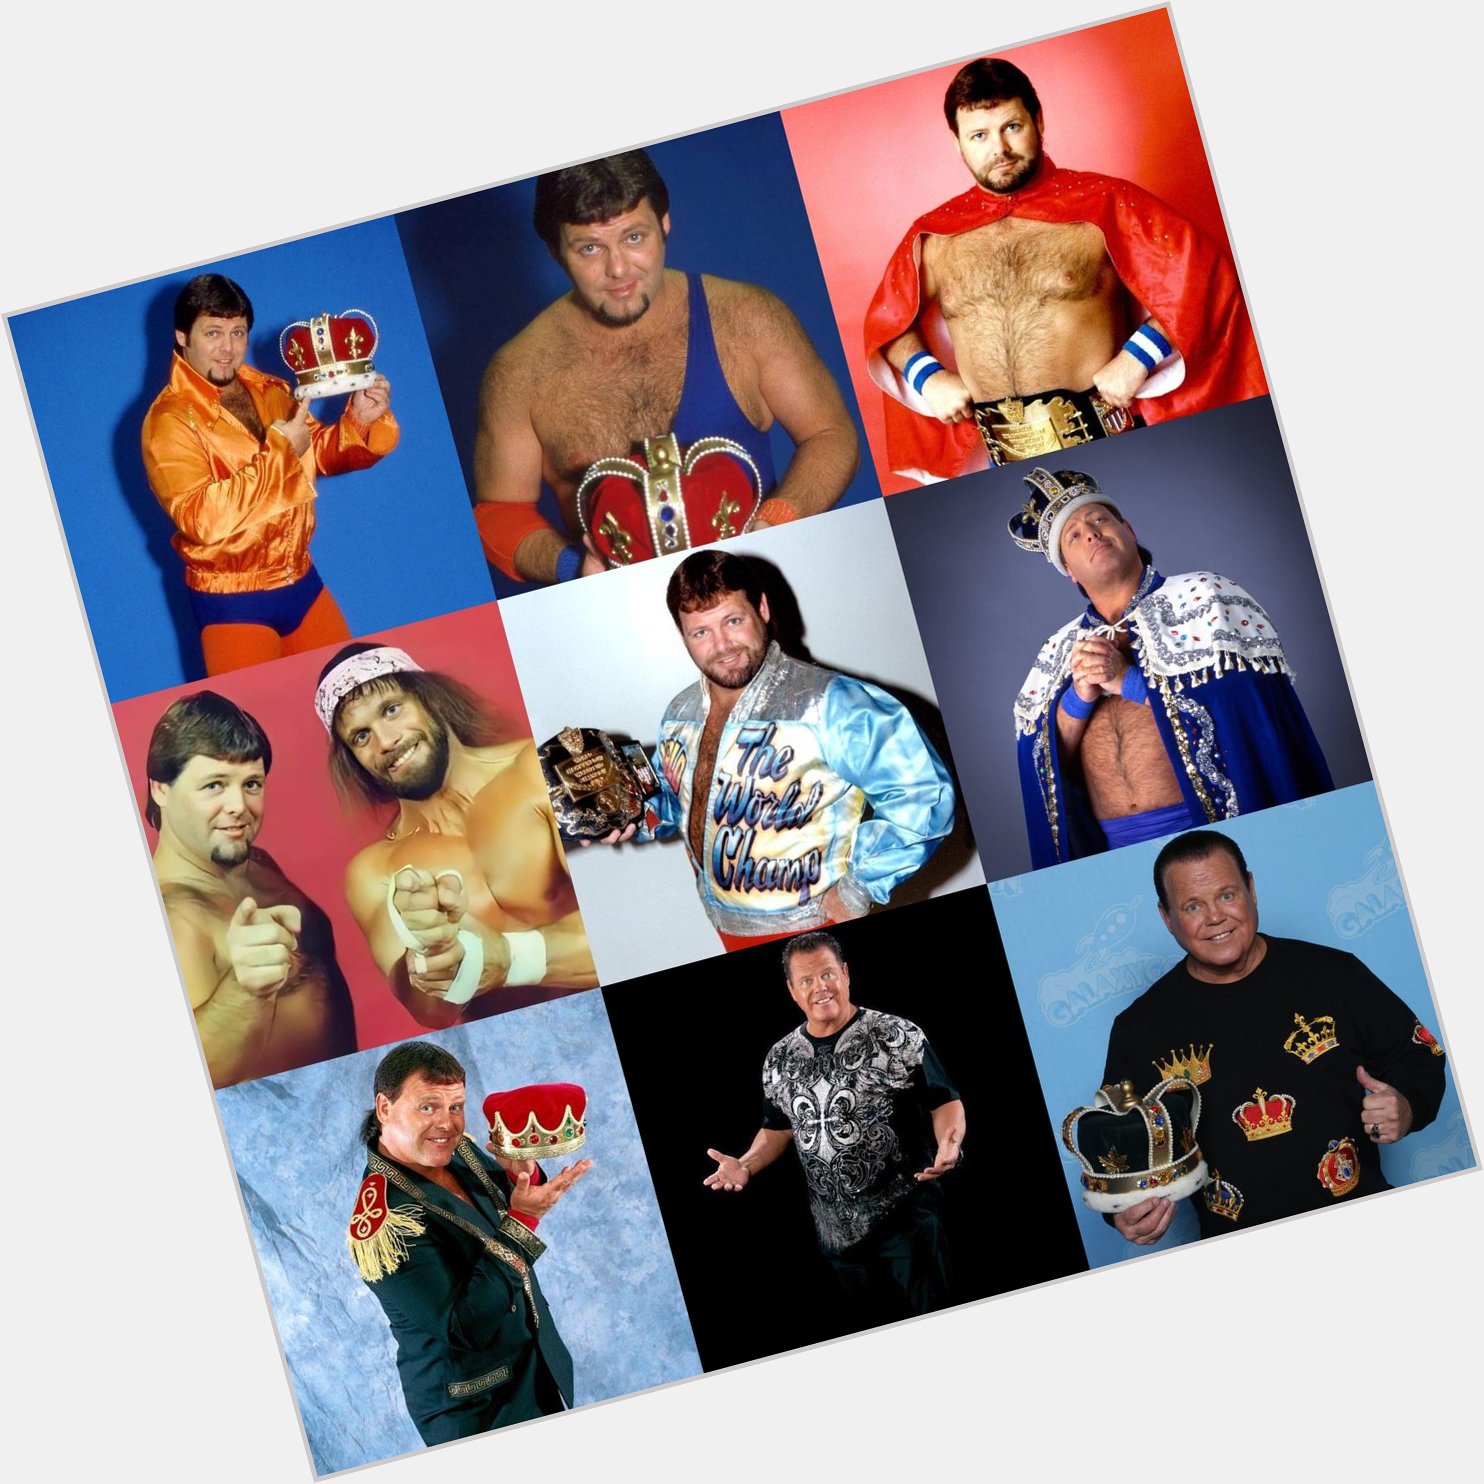 Happy Birthday to \"The King of Memphis\" Jerry Lawler!         